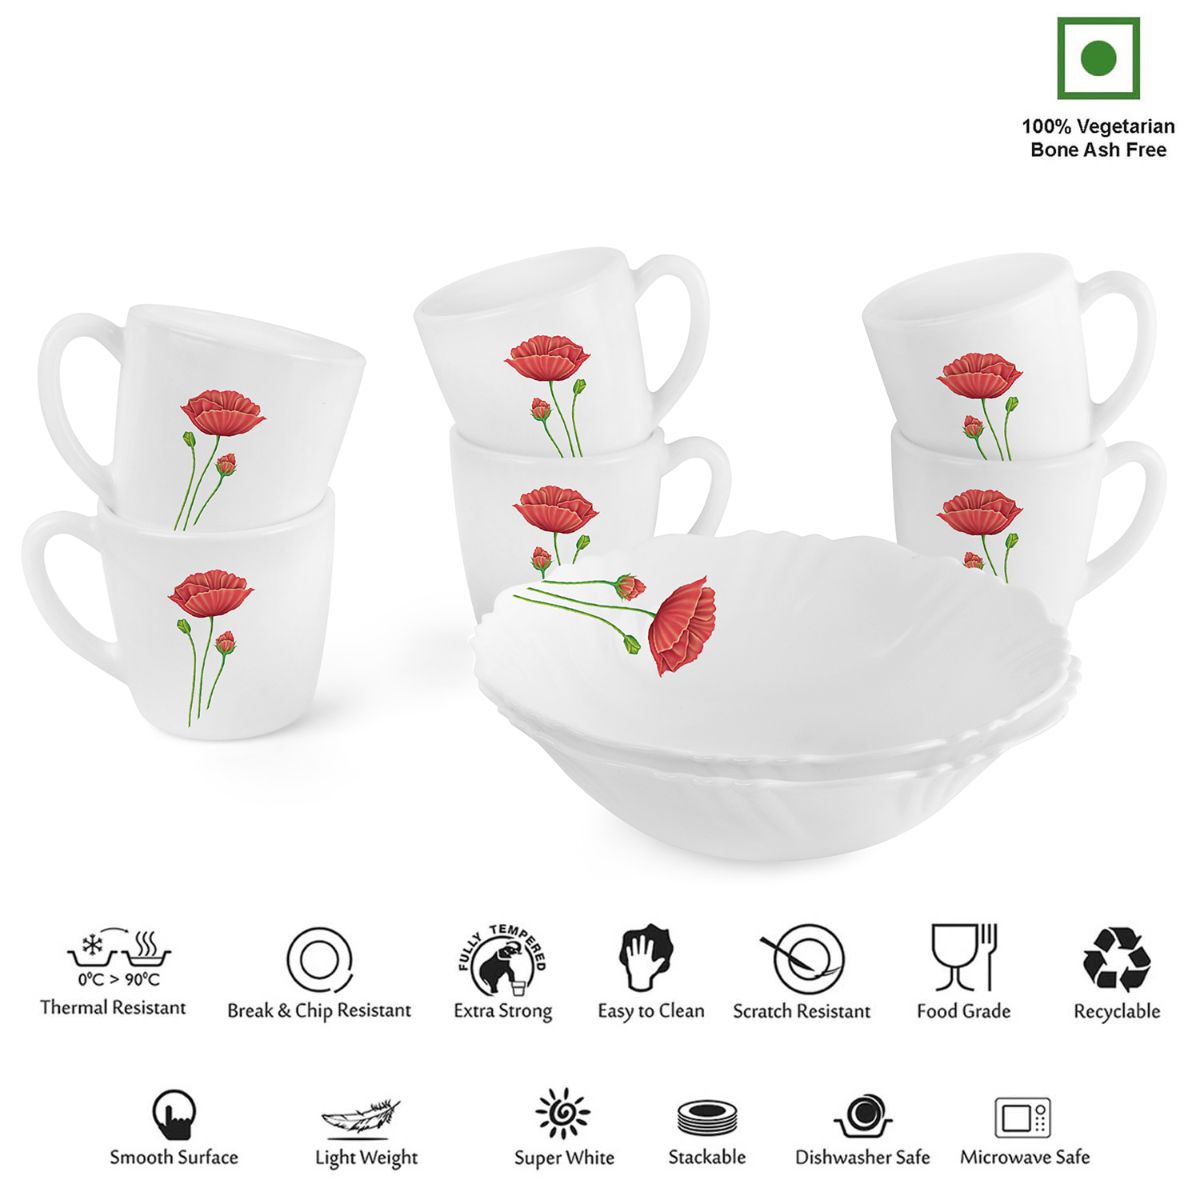 Imperial Series Quick Bite Bowl & Mug Gift set, 8 Pieces Red Poppy / 8 Pieces